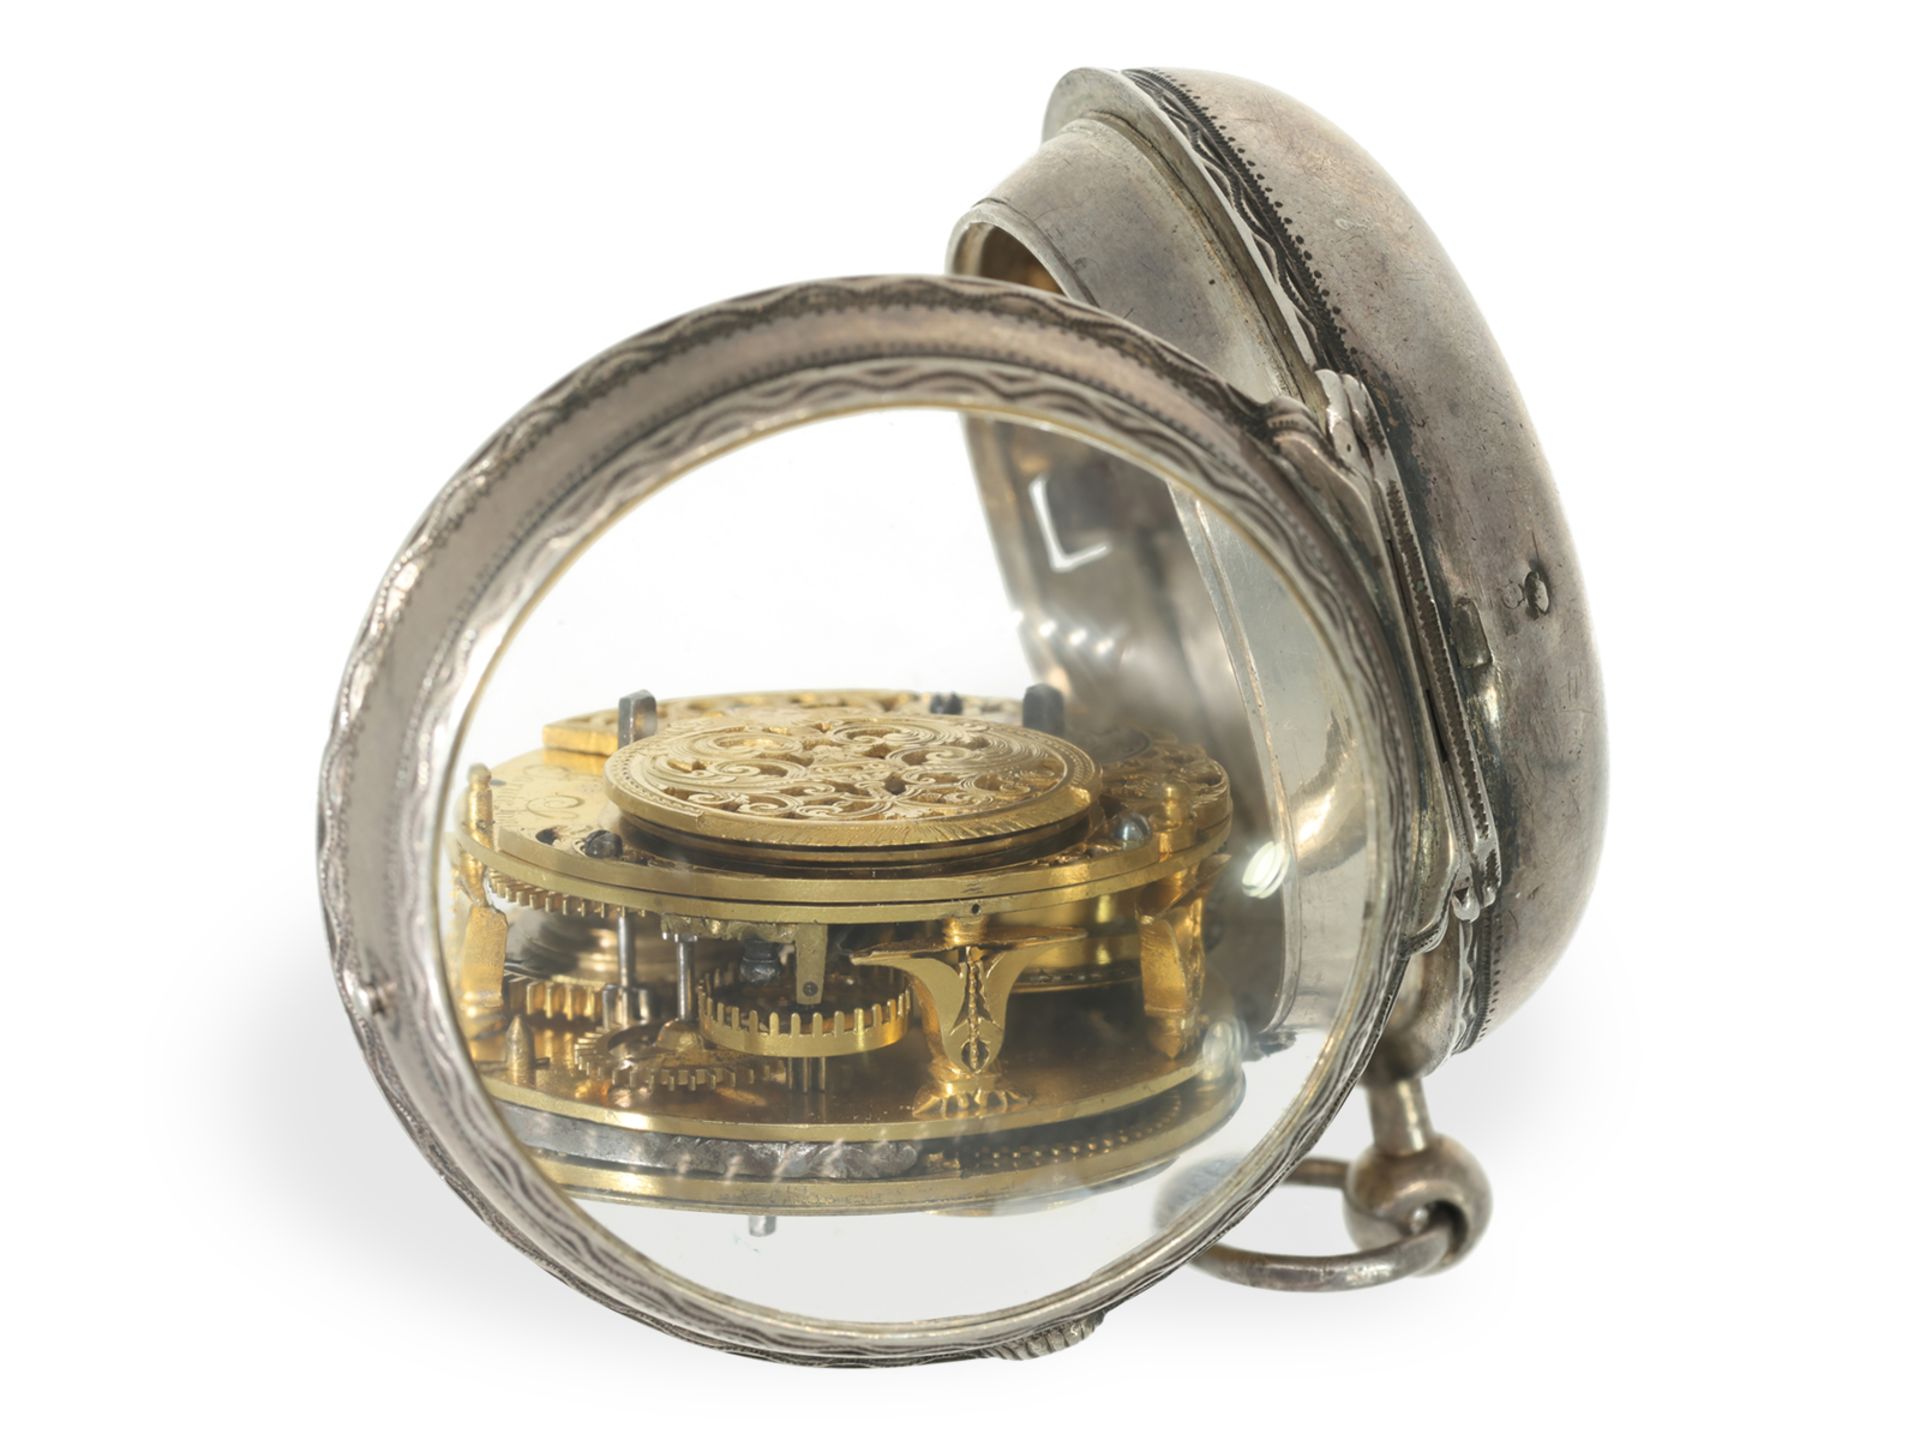 Pocket watch: museum astronomical verge watch with 6 complications, R. Jarrett London around 1690 - Image 5 of 5